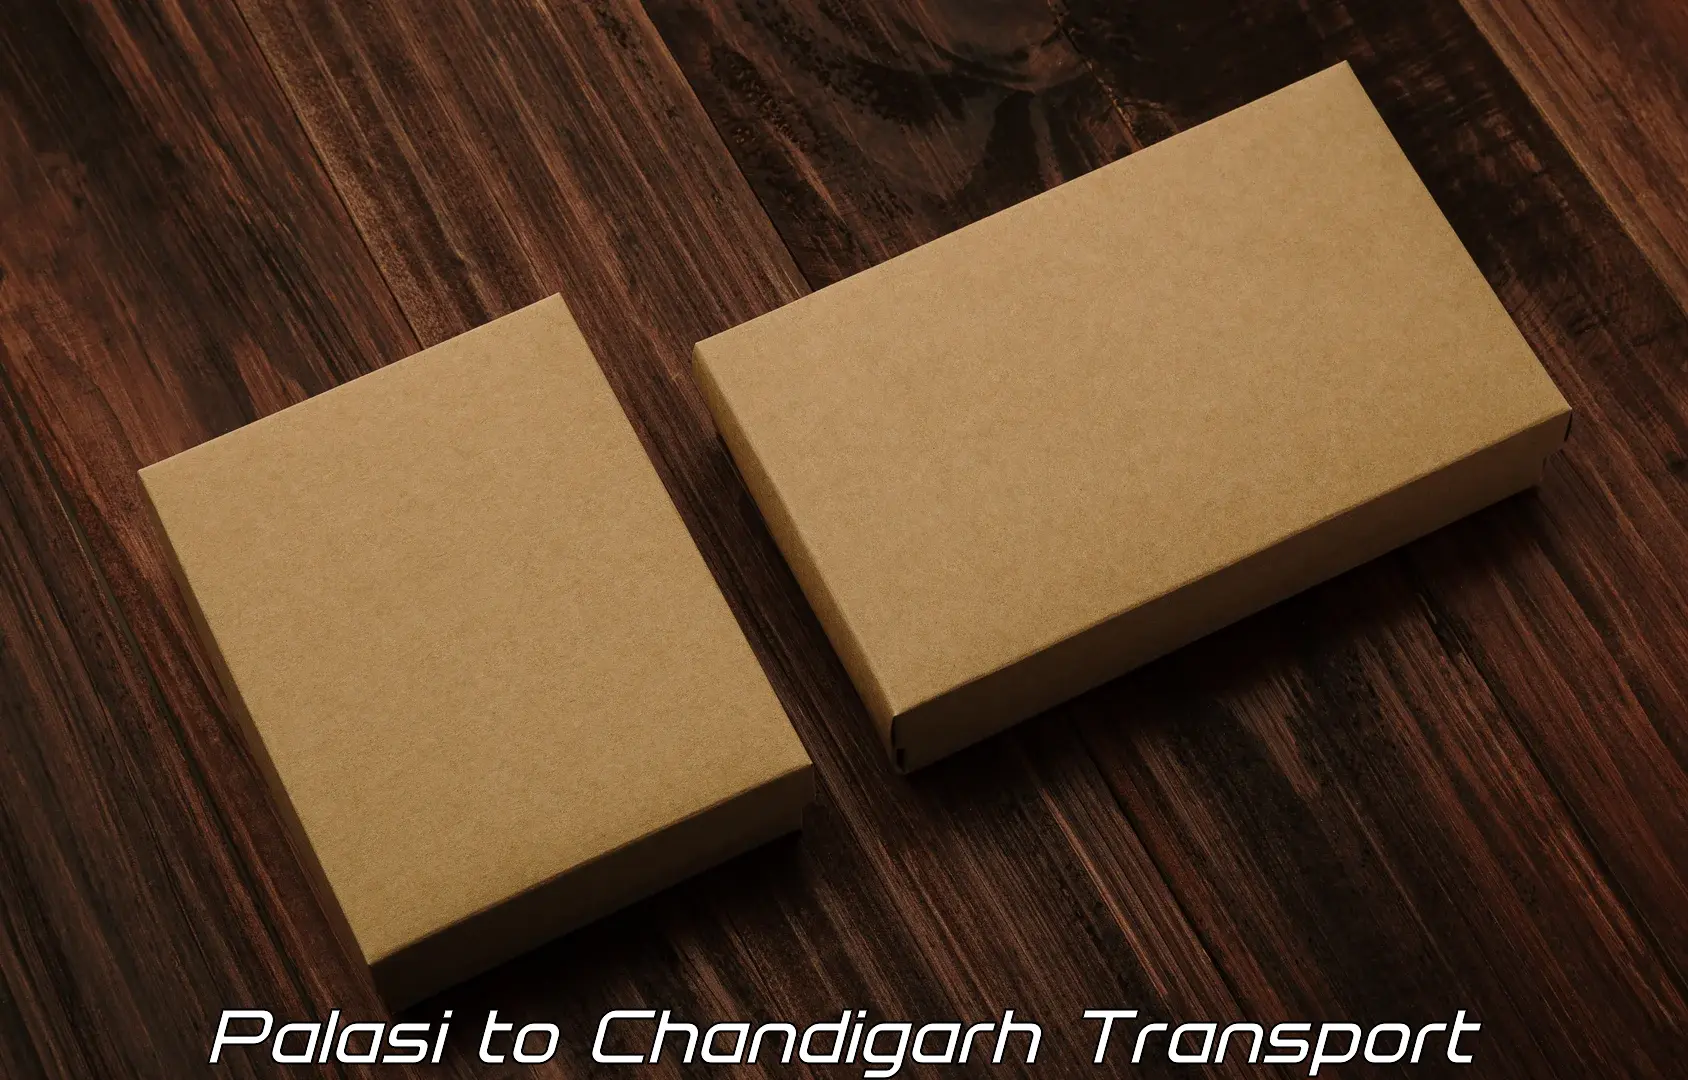 Transport bike from one state to another Palasi to Chandigarh